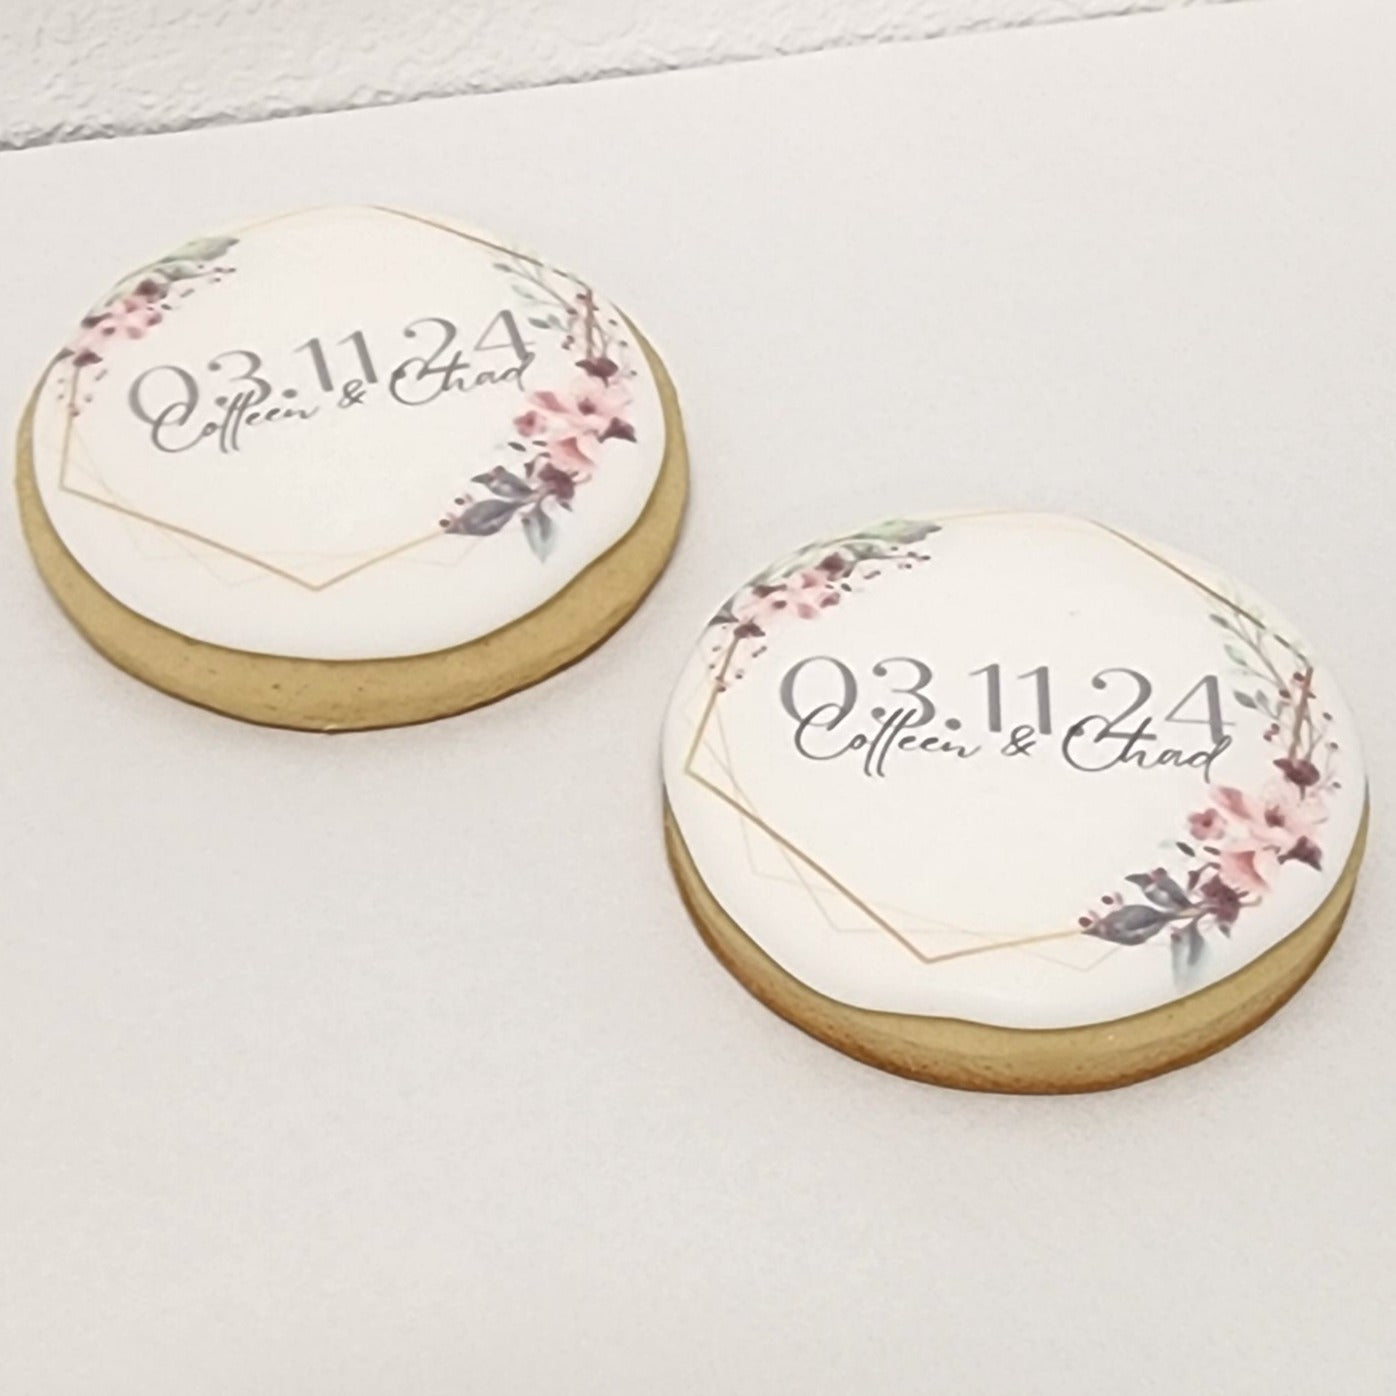 Our Wedding Day Cookies - 12 Count